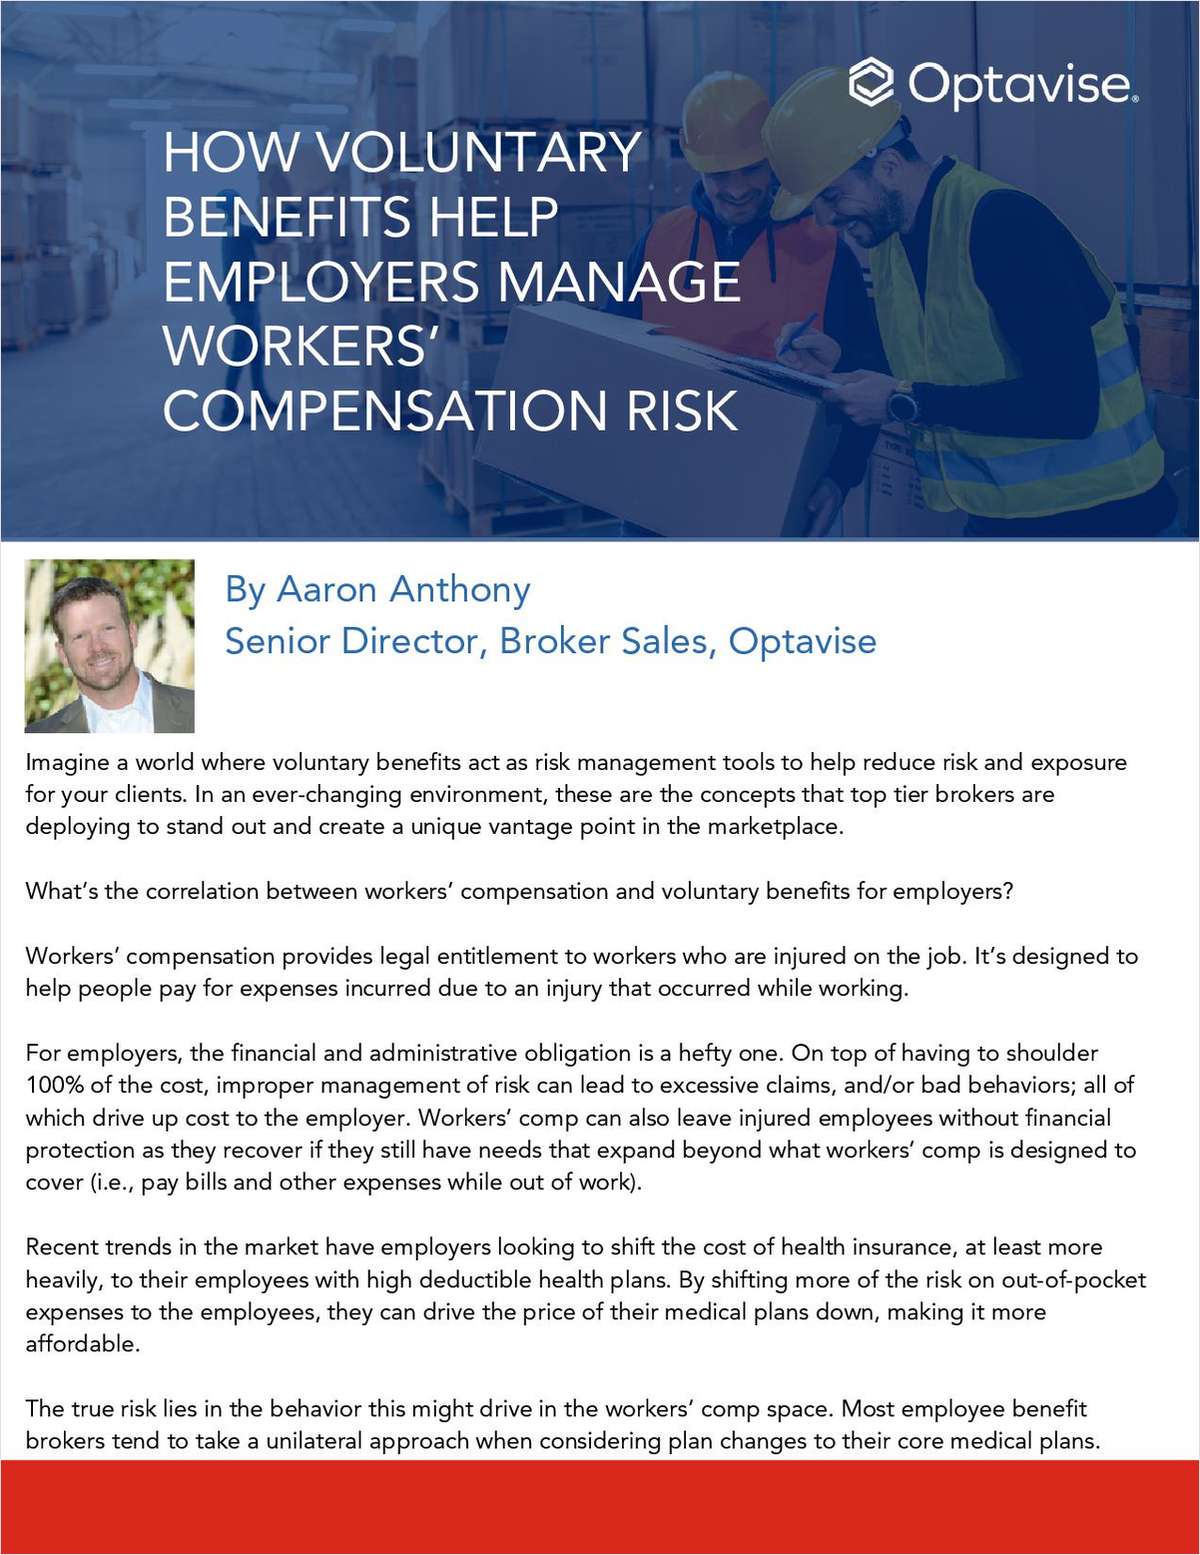 How Voluntary Benefits Help Manage Workers' Compensation Risk